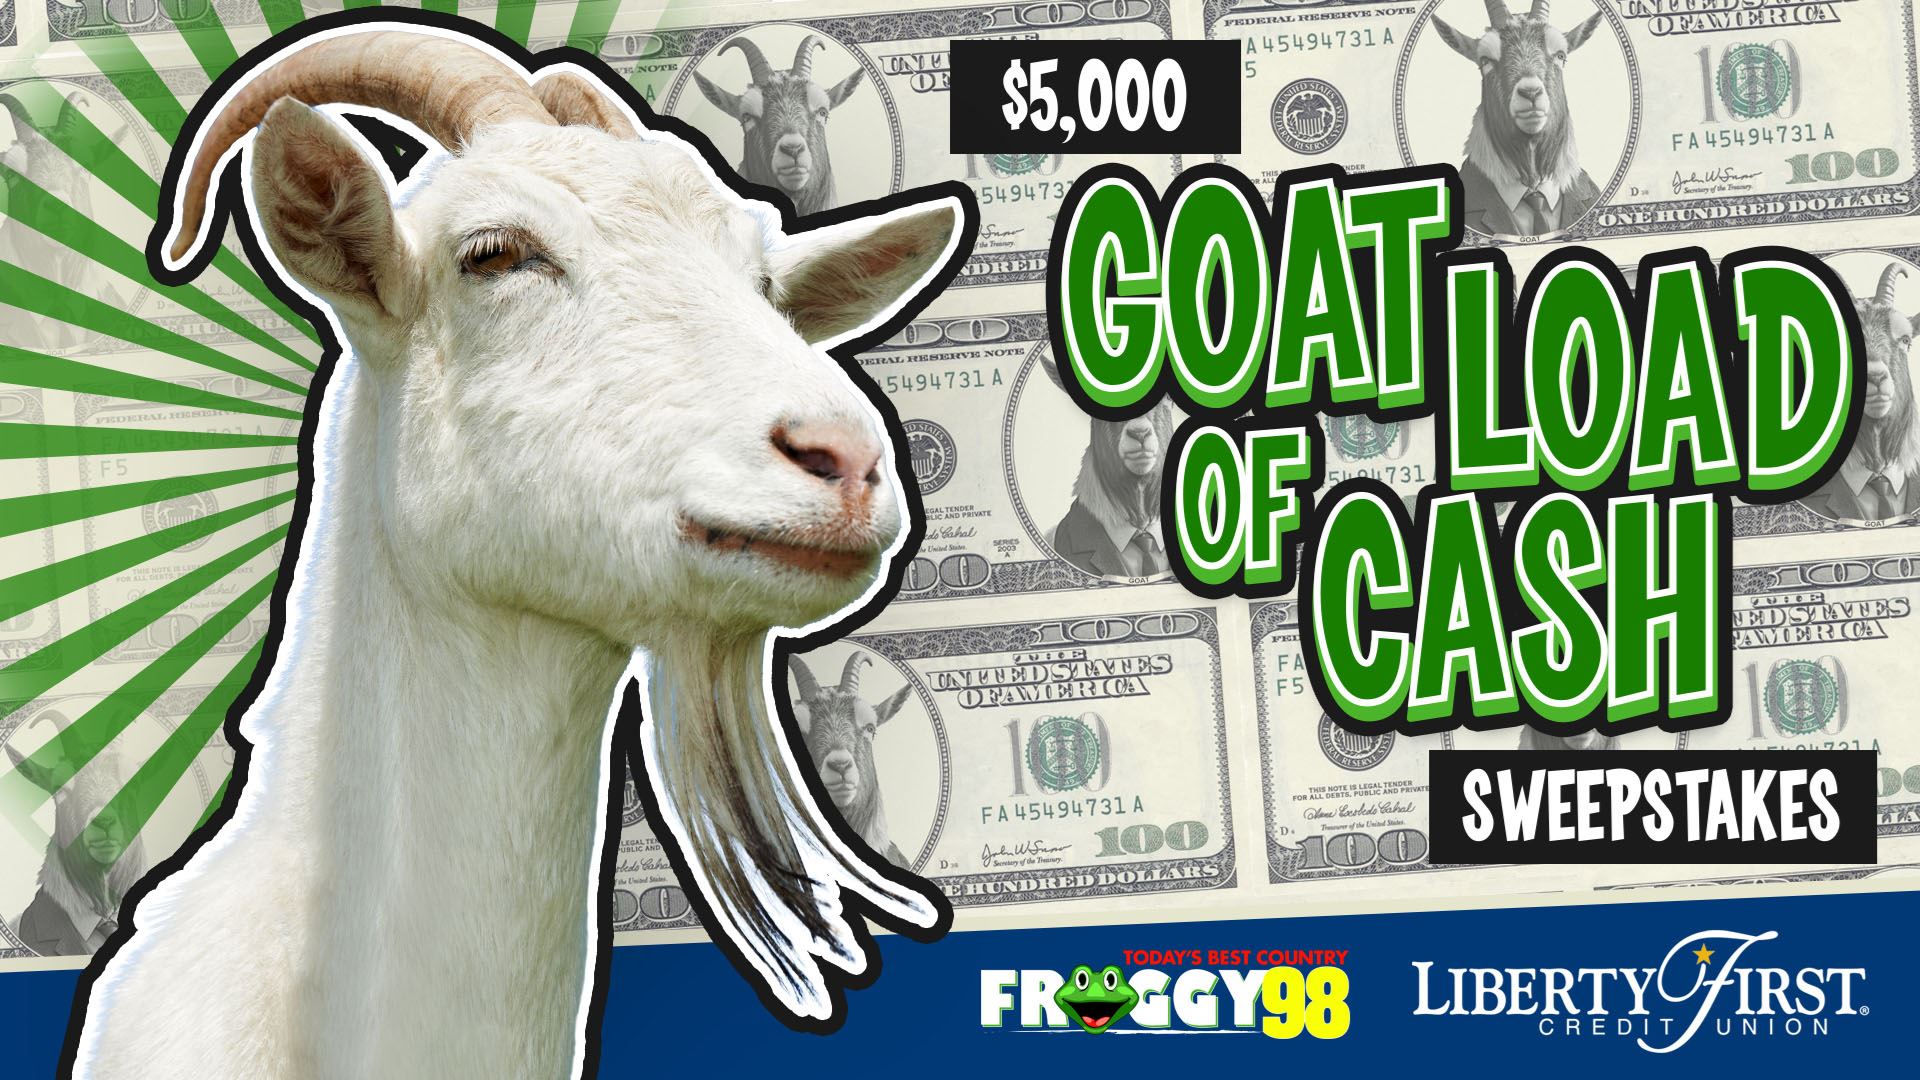 Goat Load of Cash  Froggy 98 - Today's Best Country!